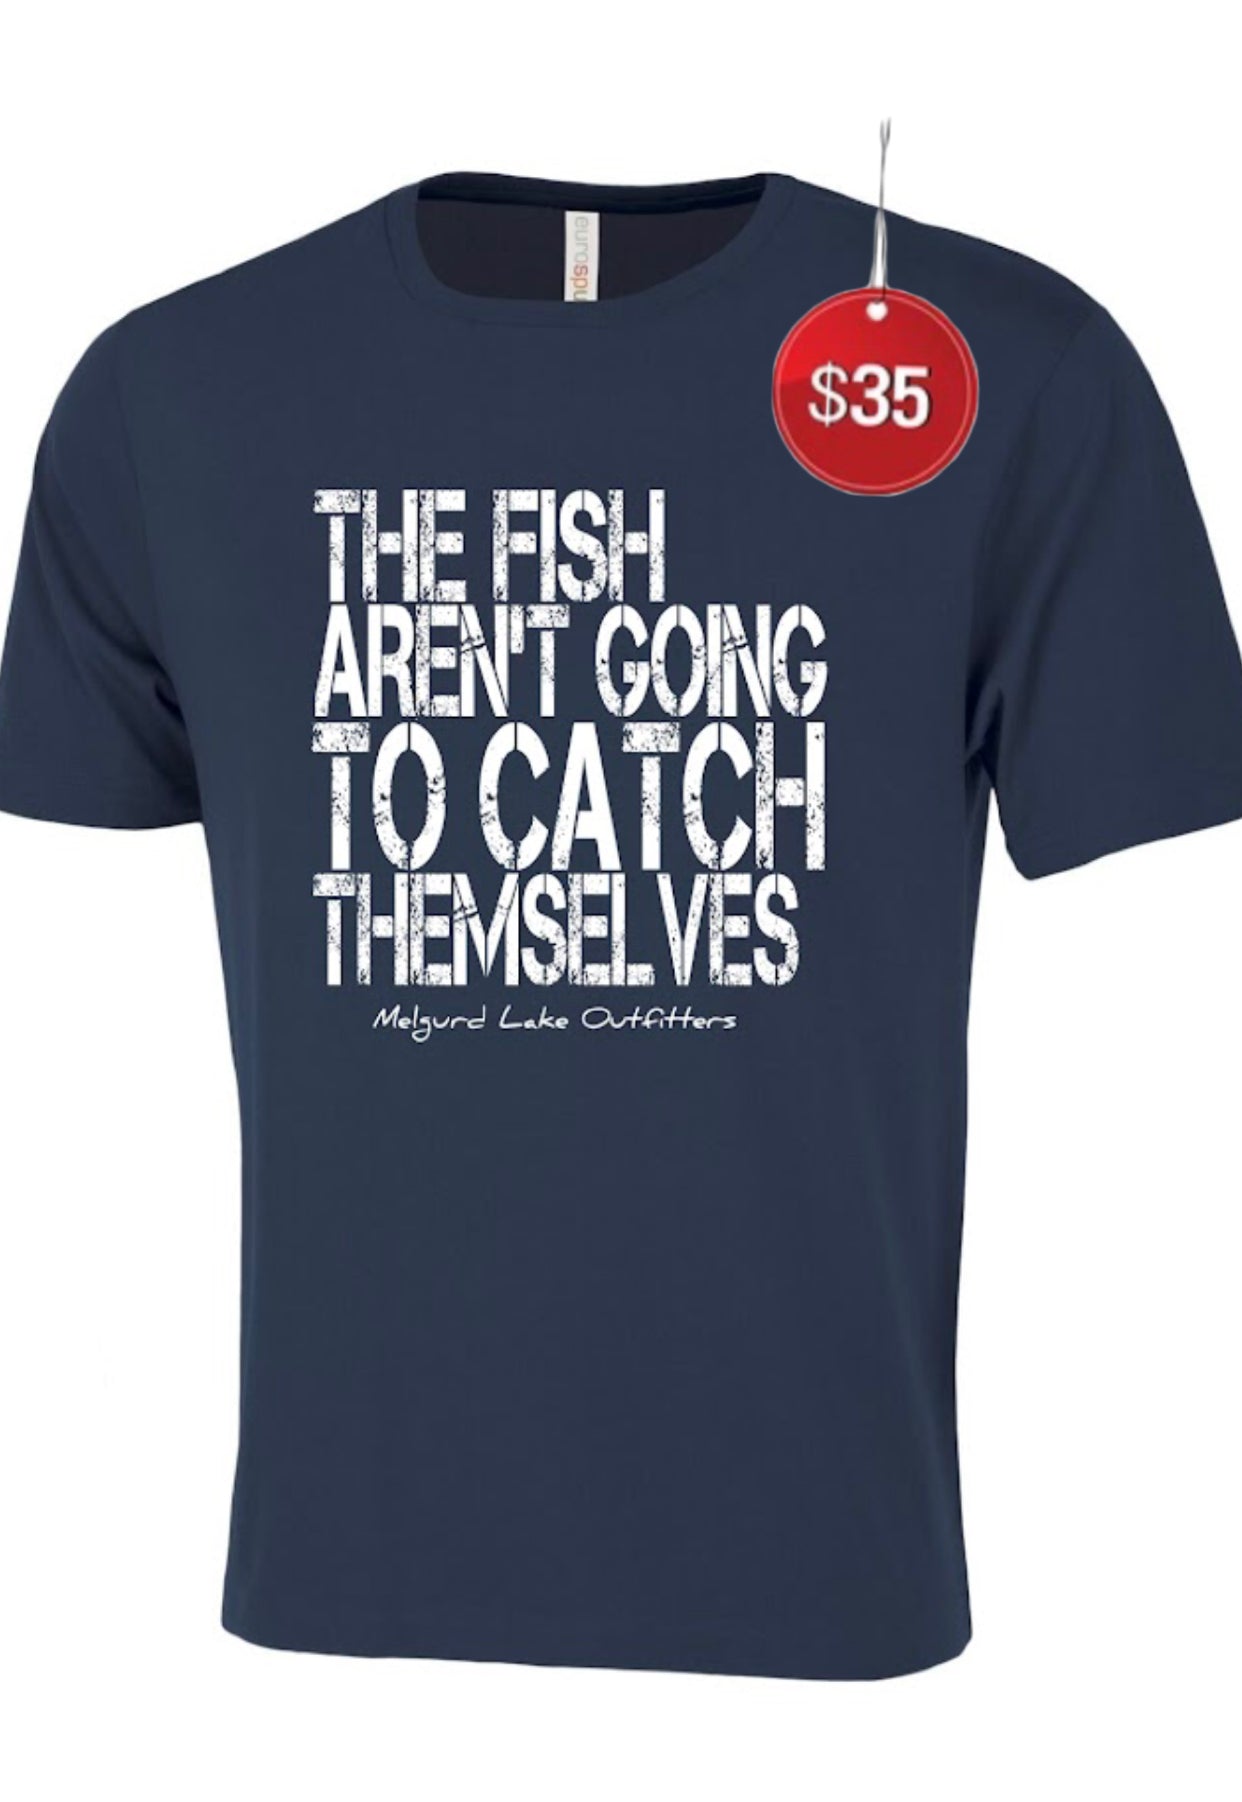 Limited Edition taken Melgurd - Outfitters Discount Navy Lake Themselves – chec Catch $15 Tee at